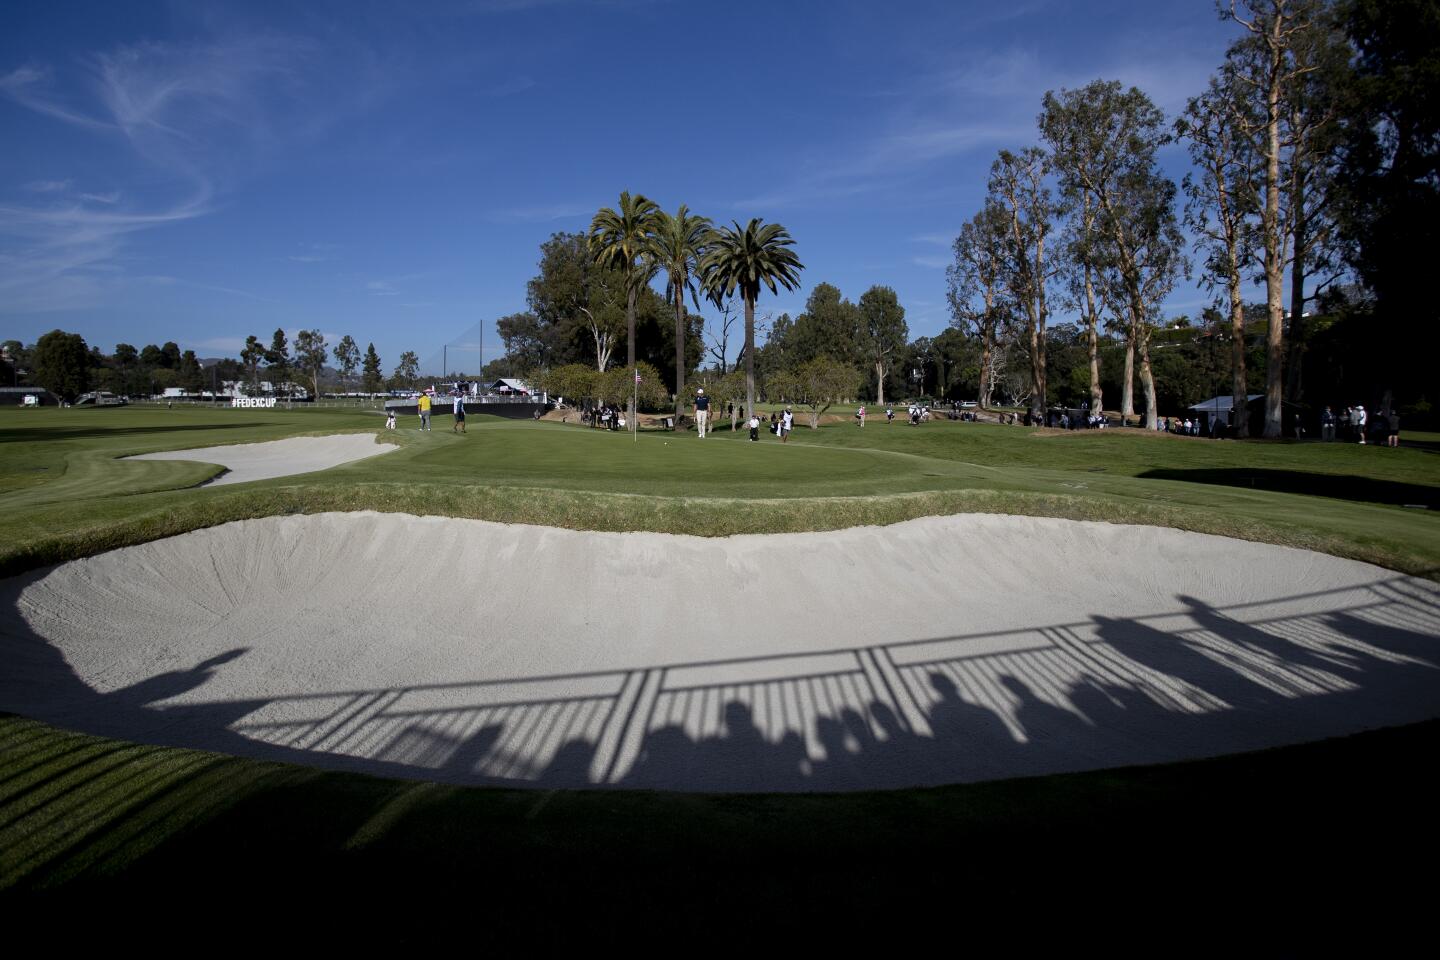 Shadows of fans in the gallery stretch across one of the bunkers on the 10th hole during the first round of the Genesis Invitational at Riviera Country Club on Feb. 13, 2020.